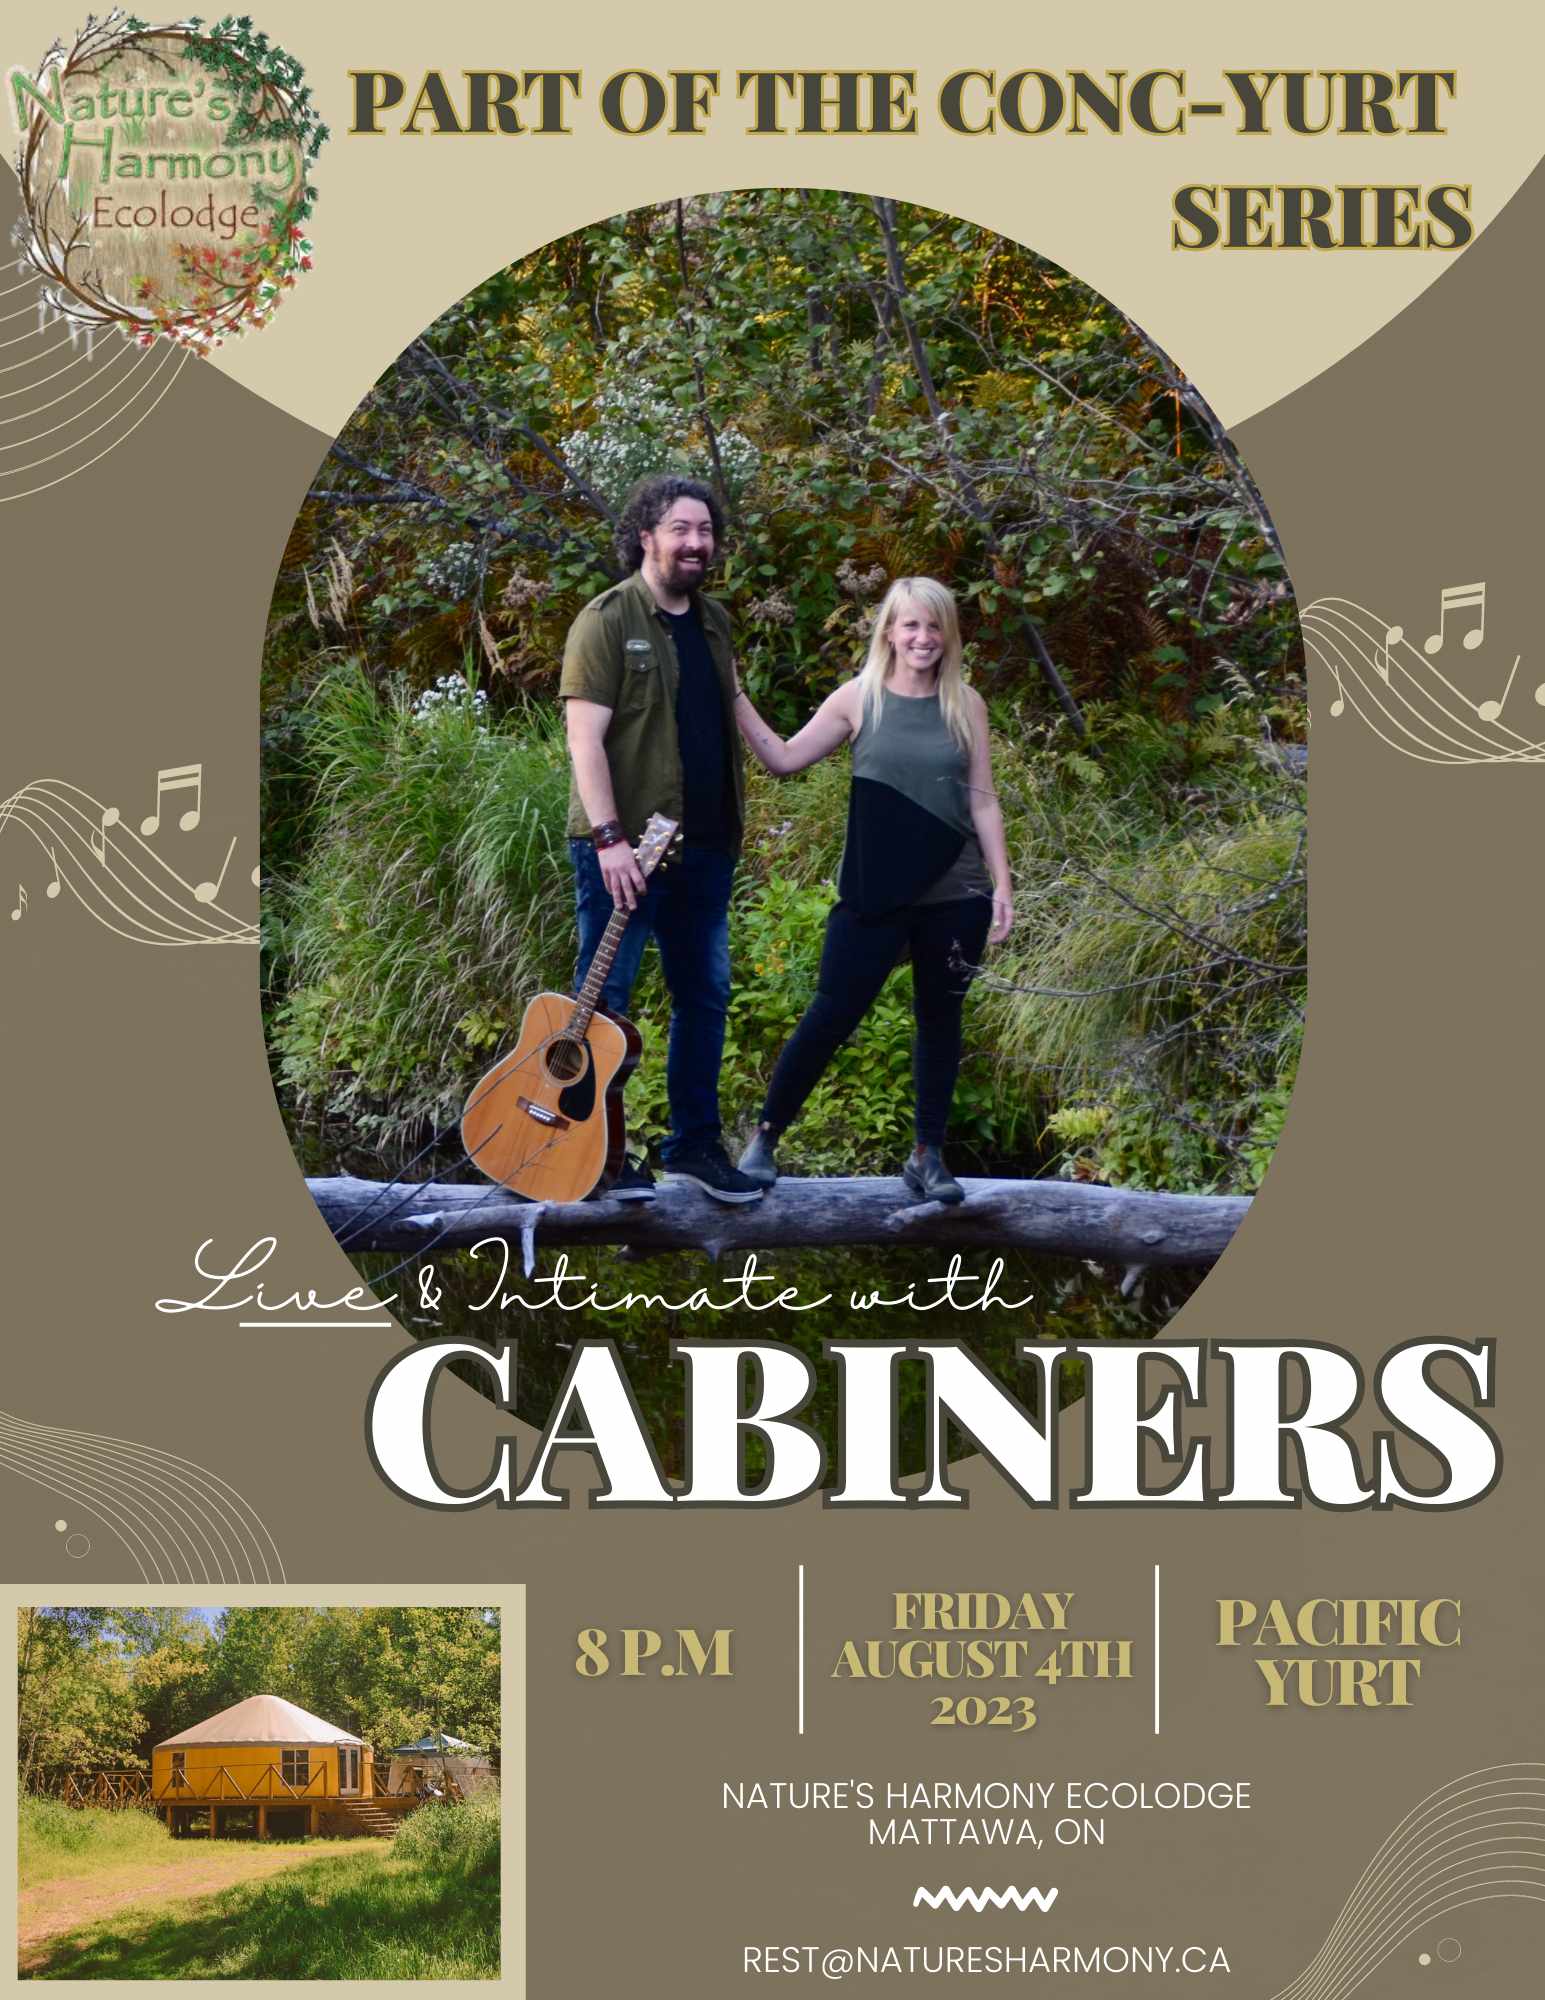 cAbiners live in Conc-Yurt!